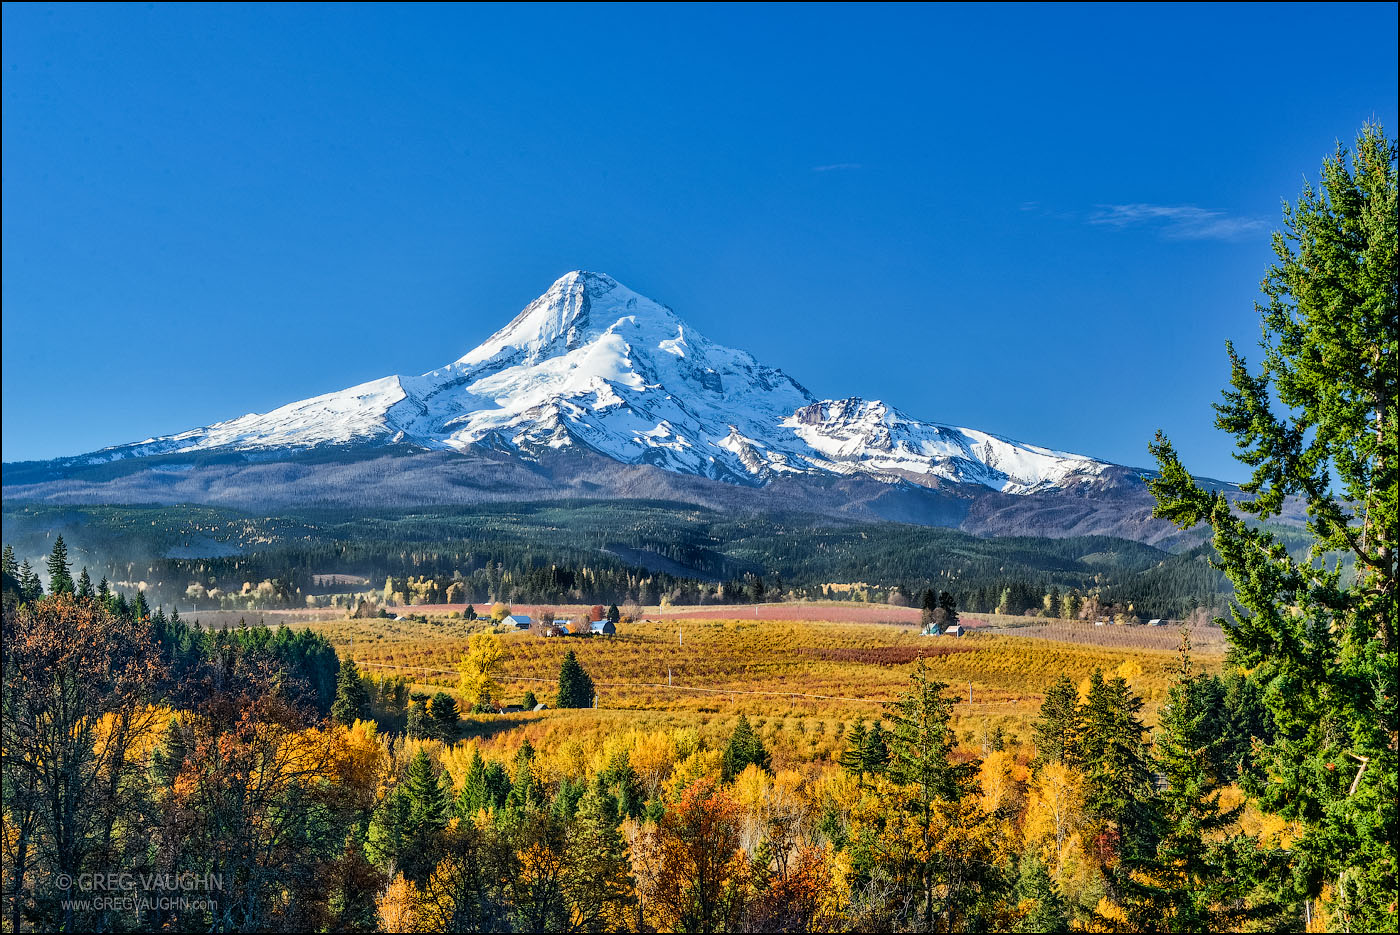 Mount Hood and the Hood River Valley with fruit tree orchards in fall color.